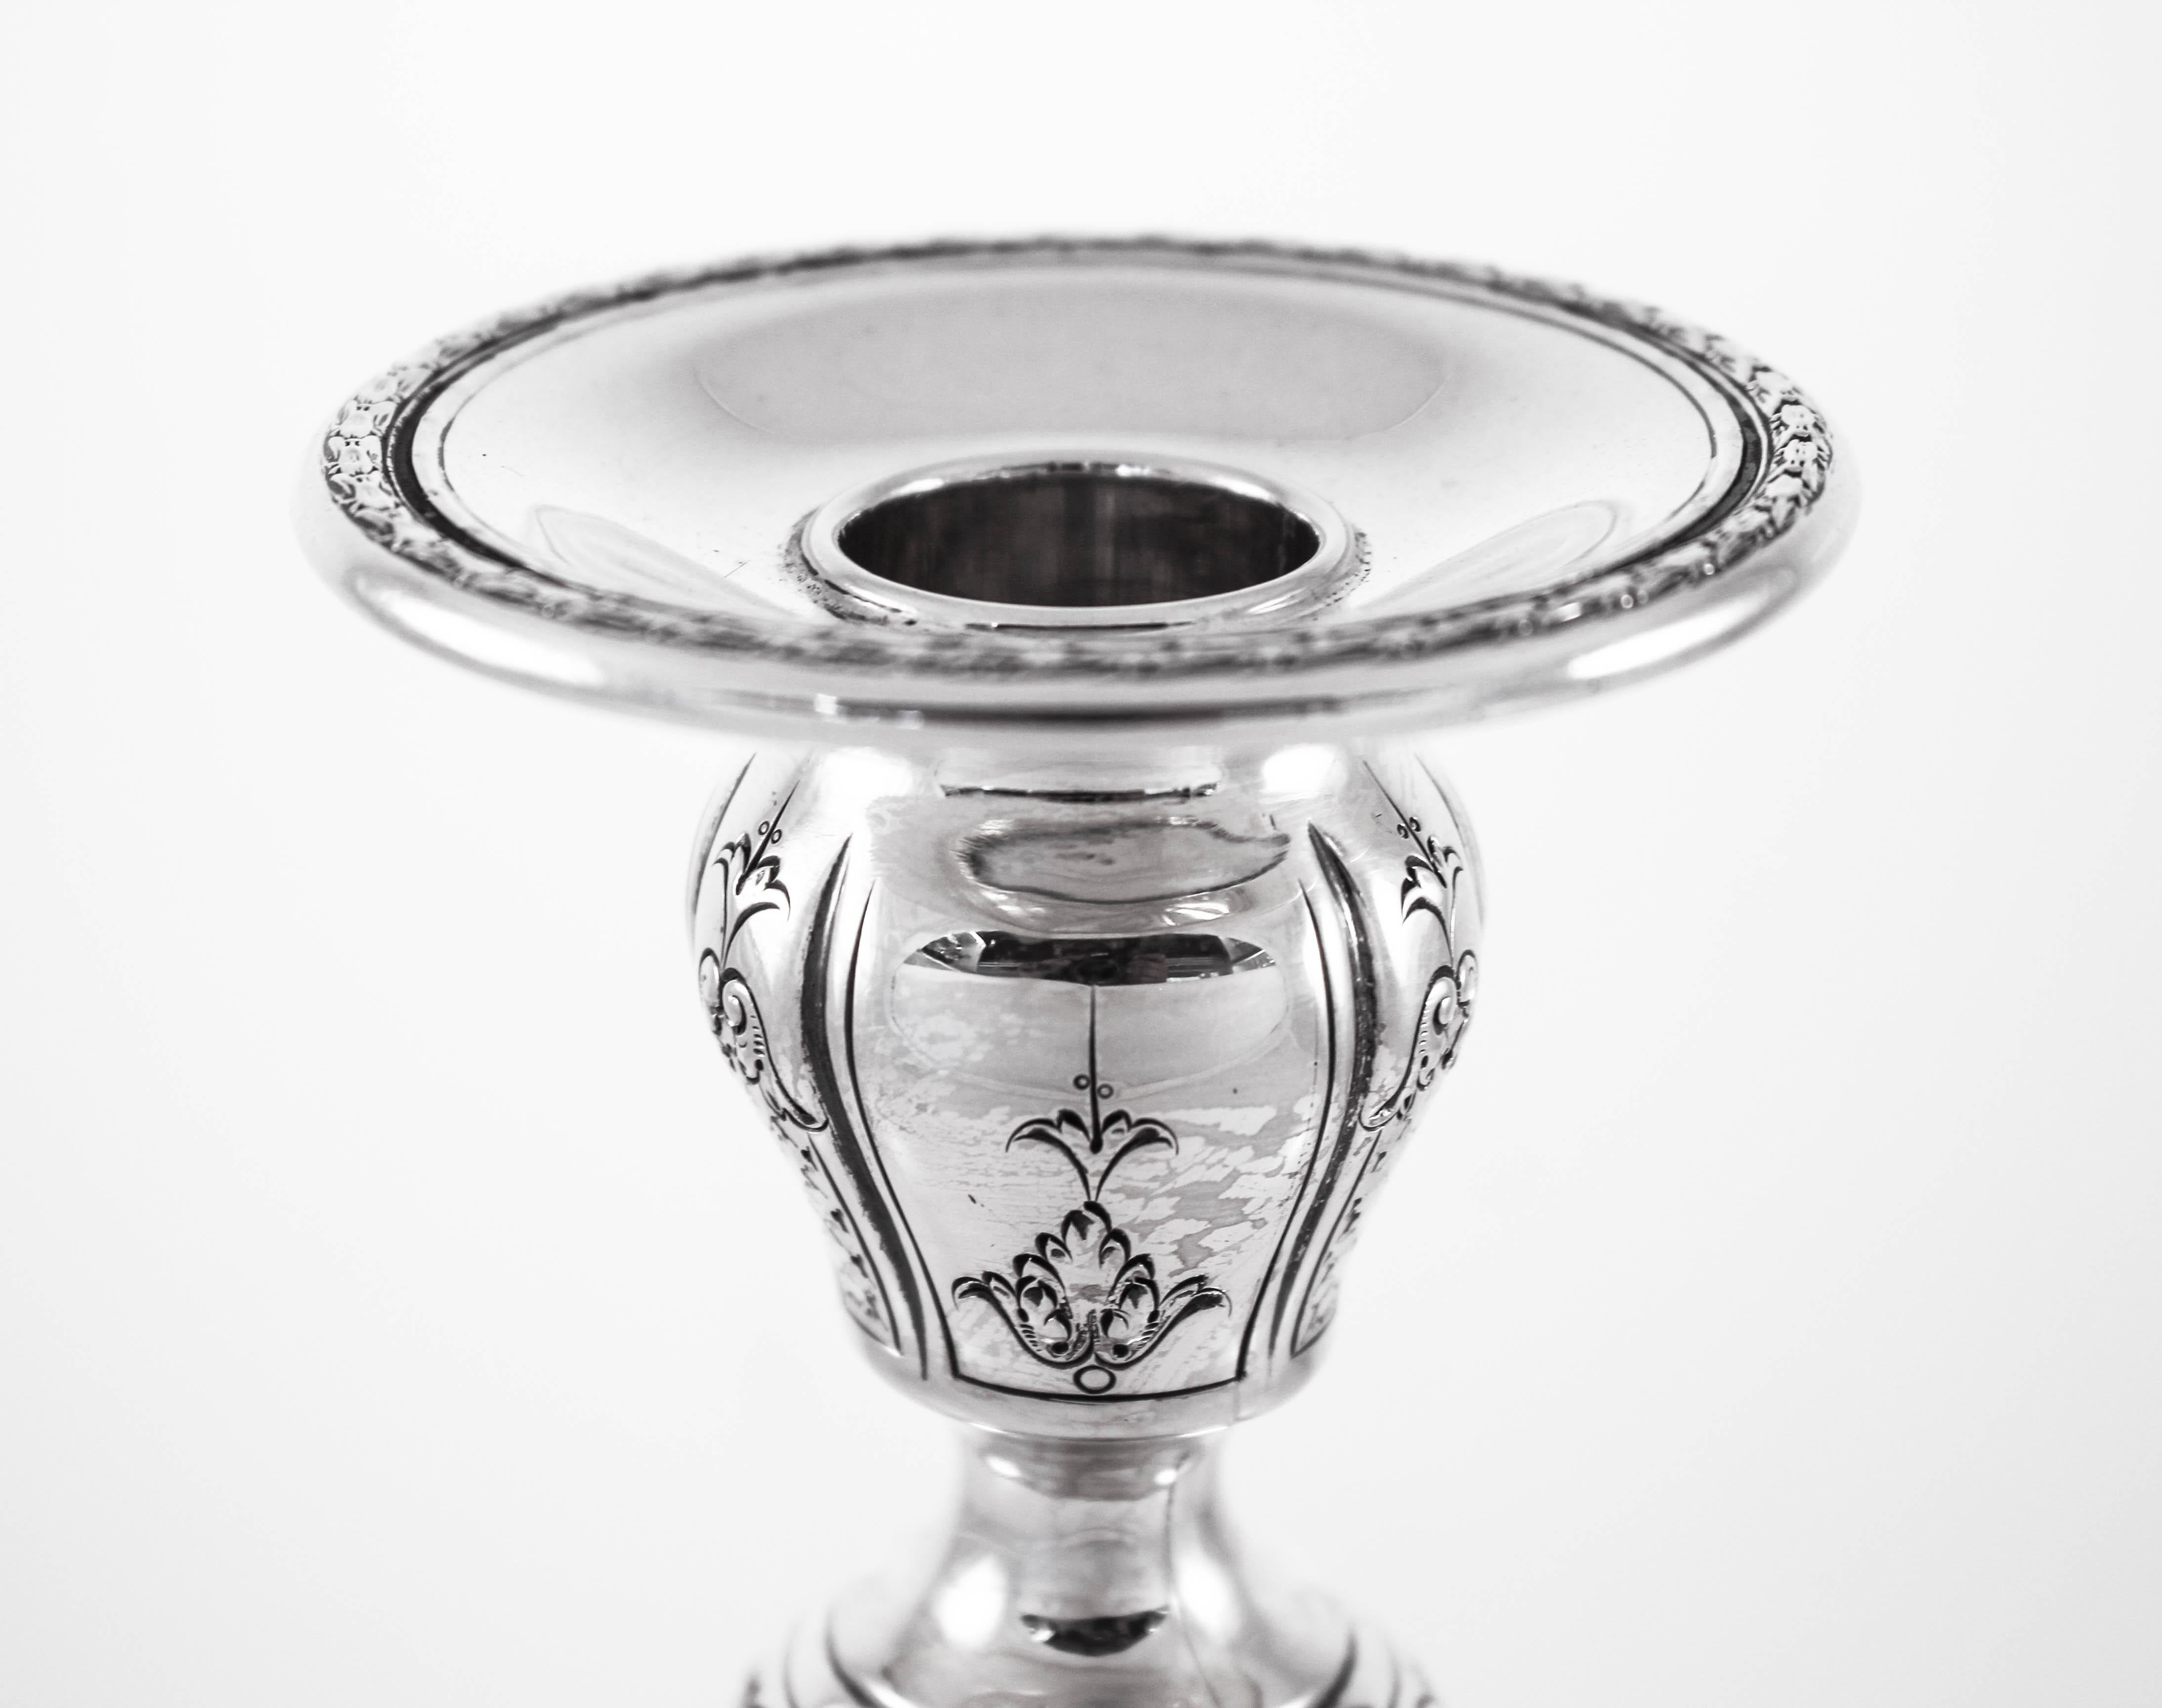 These sterling silver candlesticks have old world charm and grace. There is an etched motif along the base, body and top of flowers, wreaths and scrolls. Even the bobeche has the same pattern as can be found along the base. No detail was overlooked